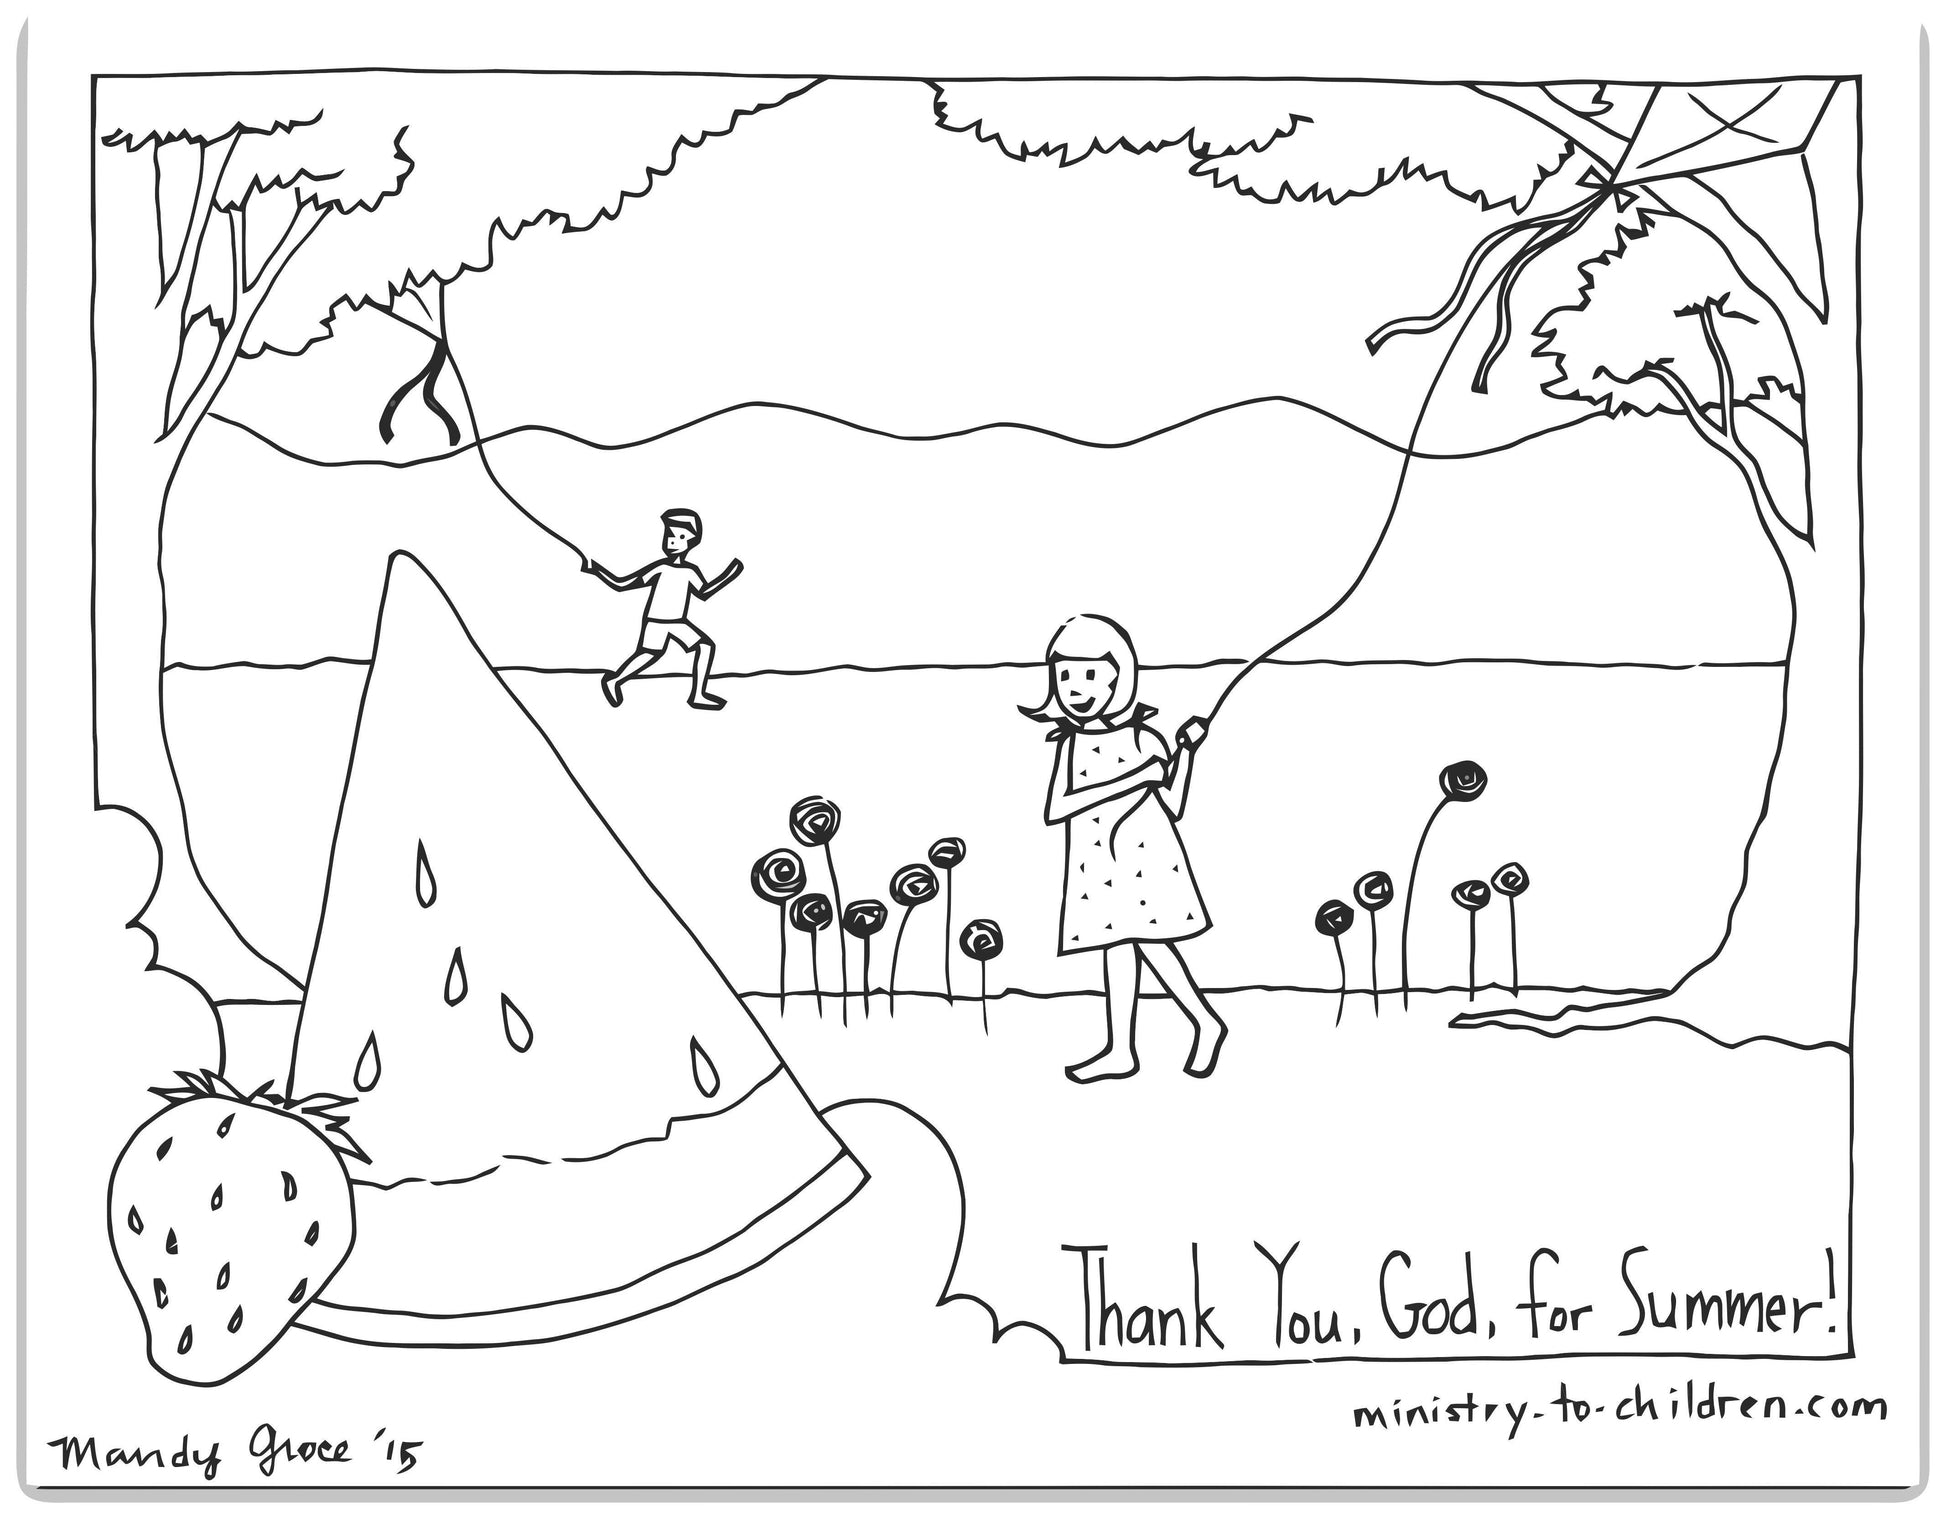 Summer coloring pages free pdf give god thanks for summertime